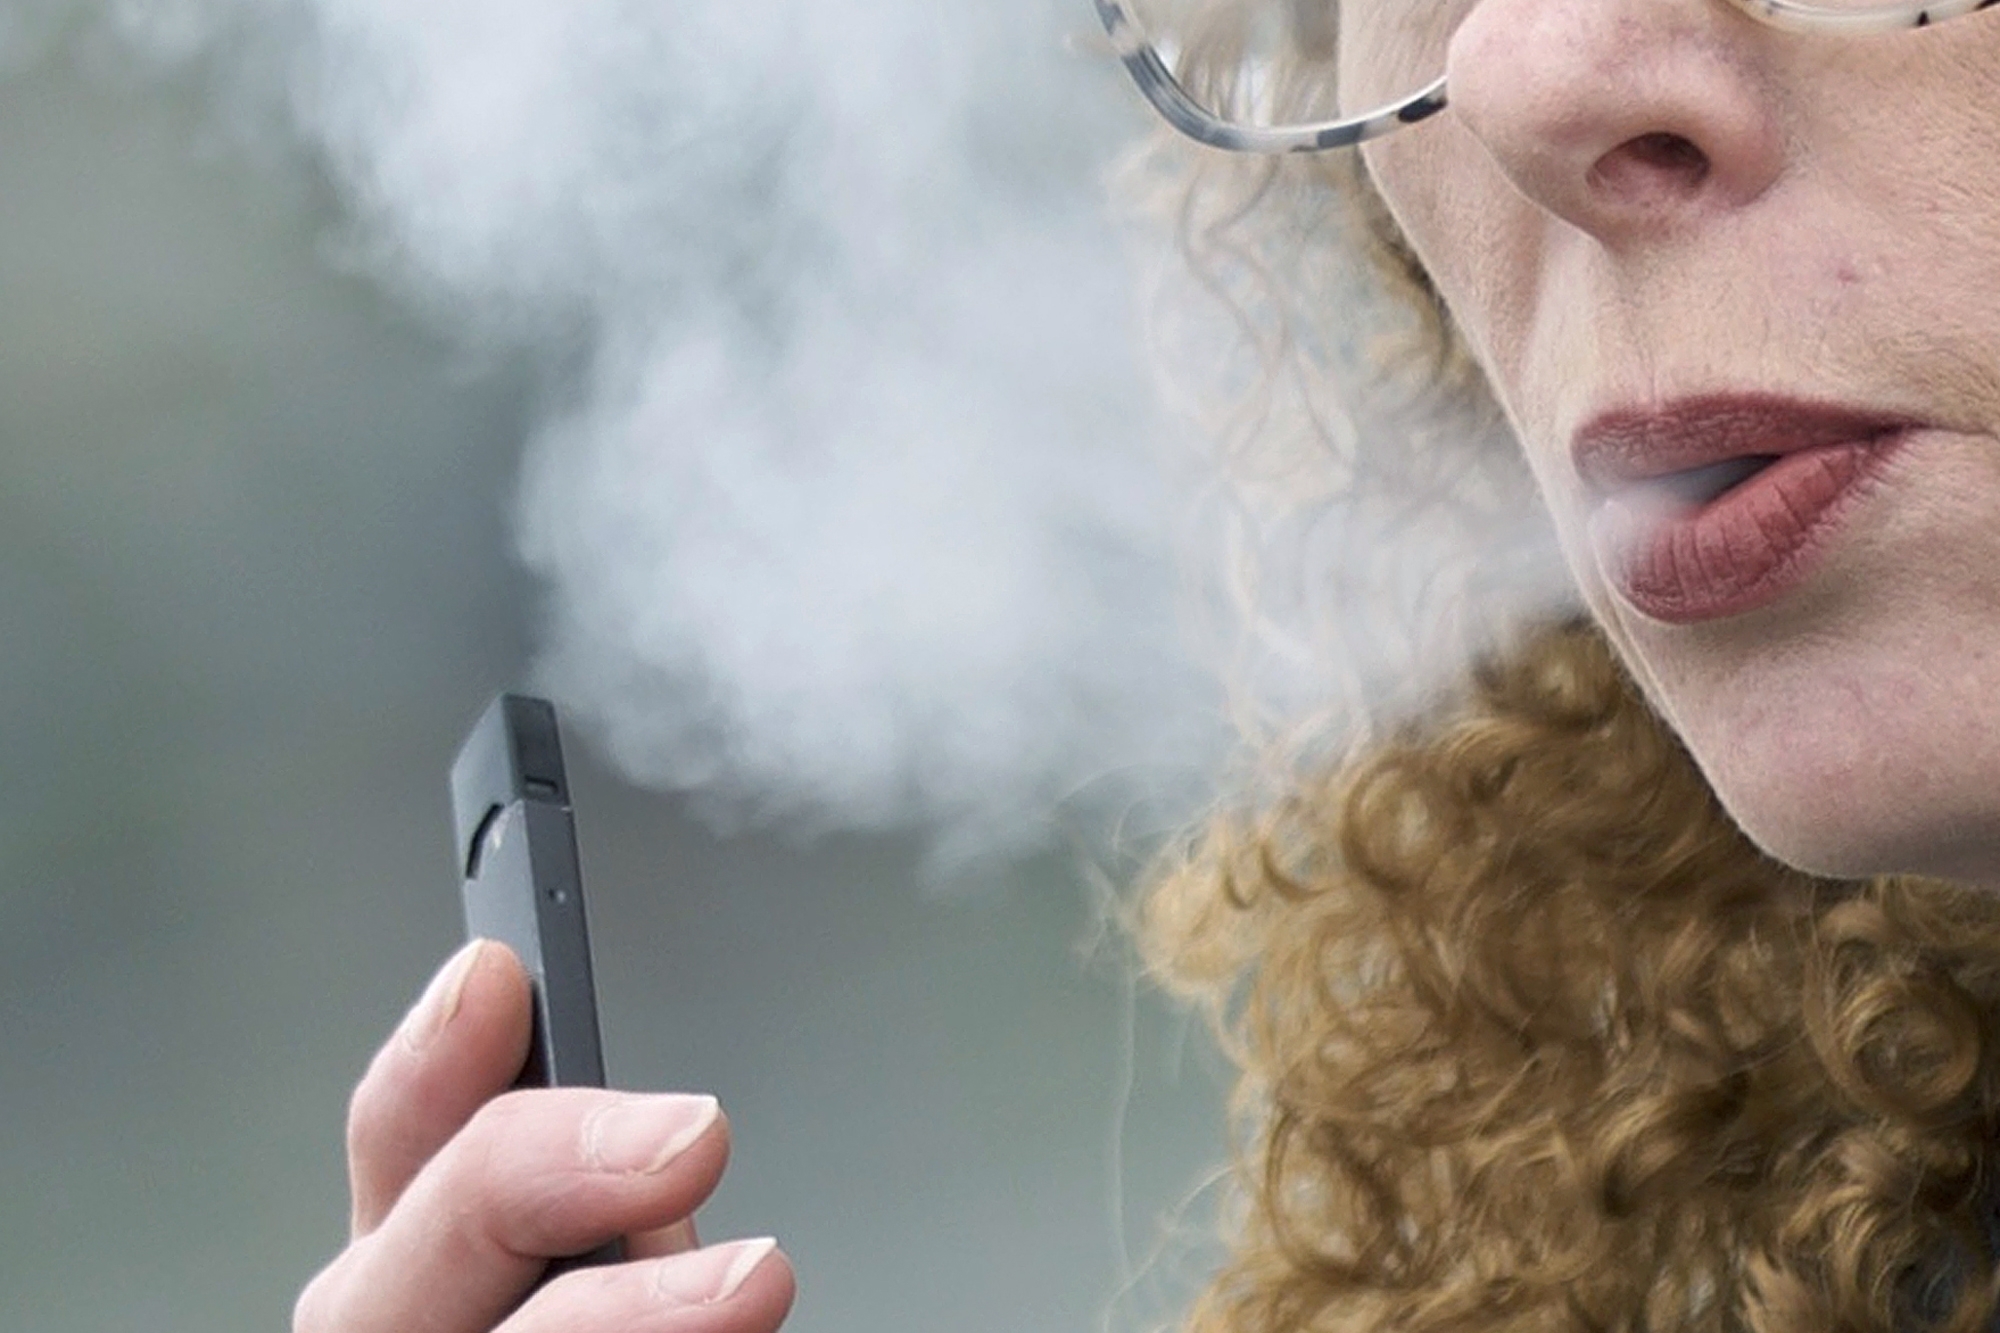 PHOTO: In this April 16, 2019 file photo, a woman exhales while vaping from a Juul pen e-cigarette. On Wednesday, Feb. 12, 2020, Massachusetts sued Juul Labs Inc, accusing the company of deliberating targeting young people through its marketing campaigns.